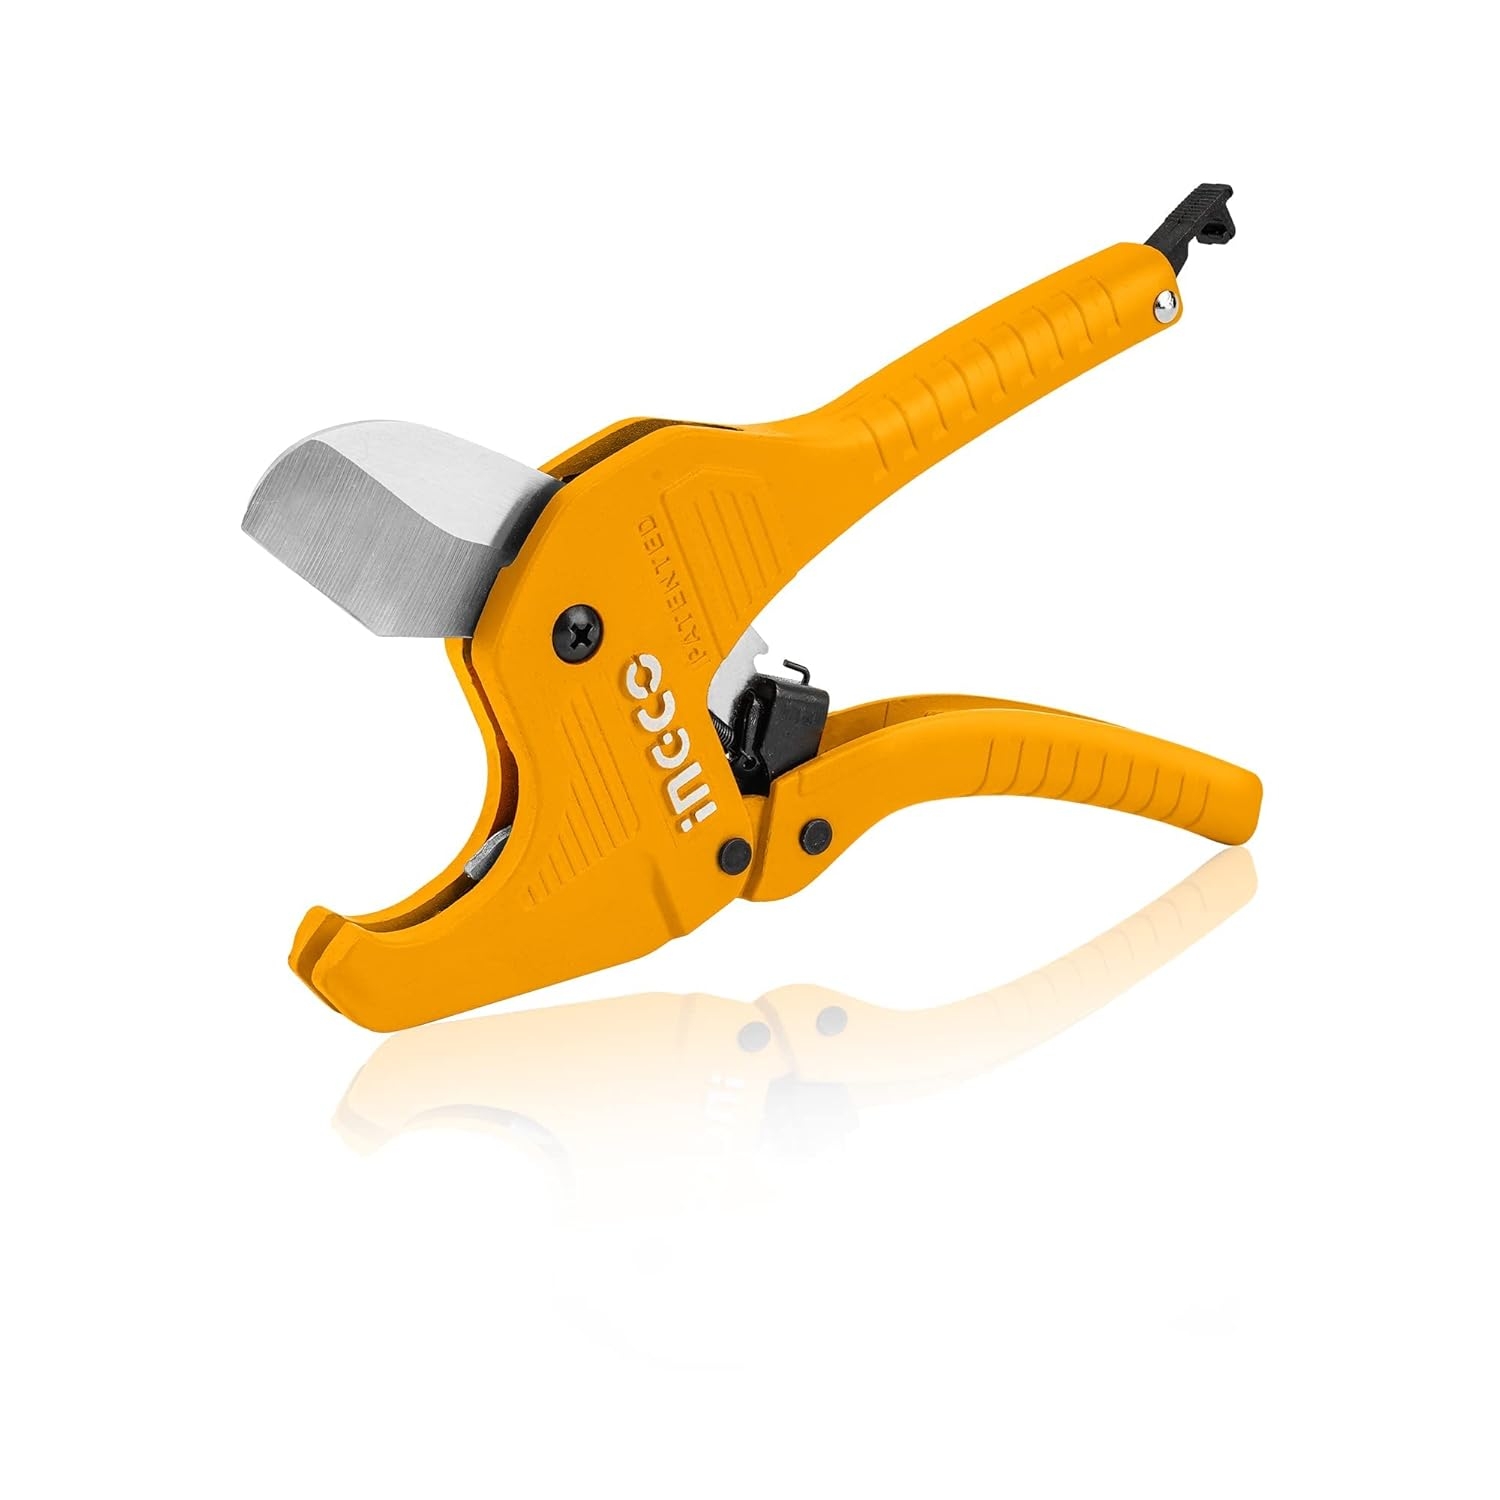 INGCO HPCS05428 PVC Pipe Cutter, 3-42mm INGCO Plastic Pipe Cutter, 4CR13 Tube Cutter, New Unique Handle, One-Hand Fast Pipe Cutting Tool